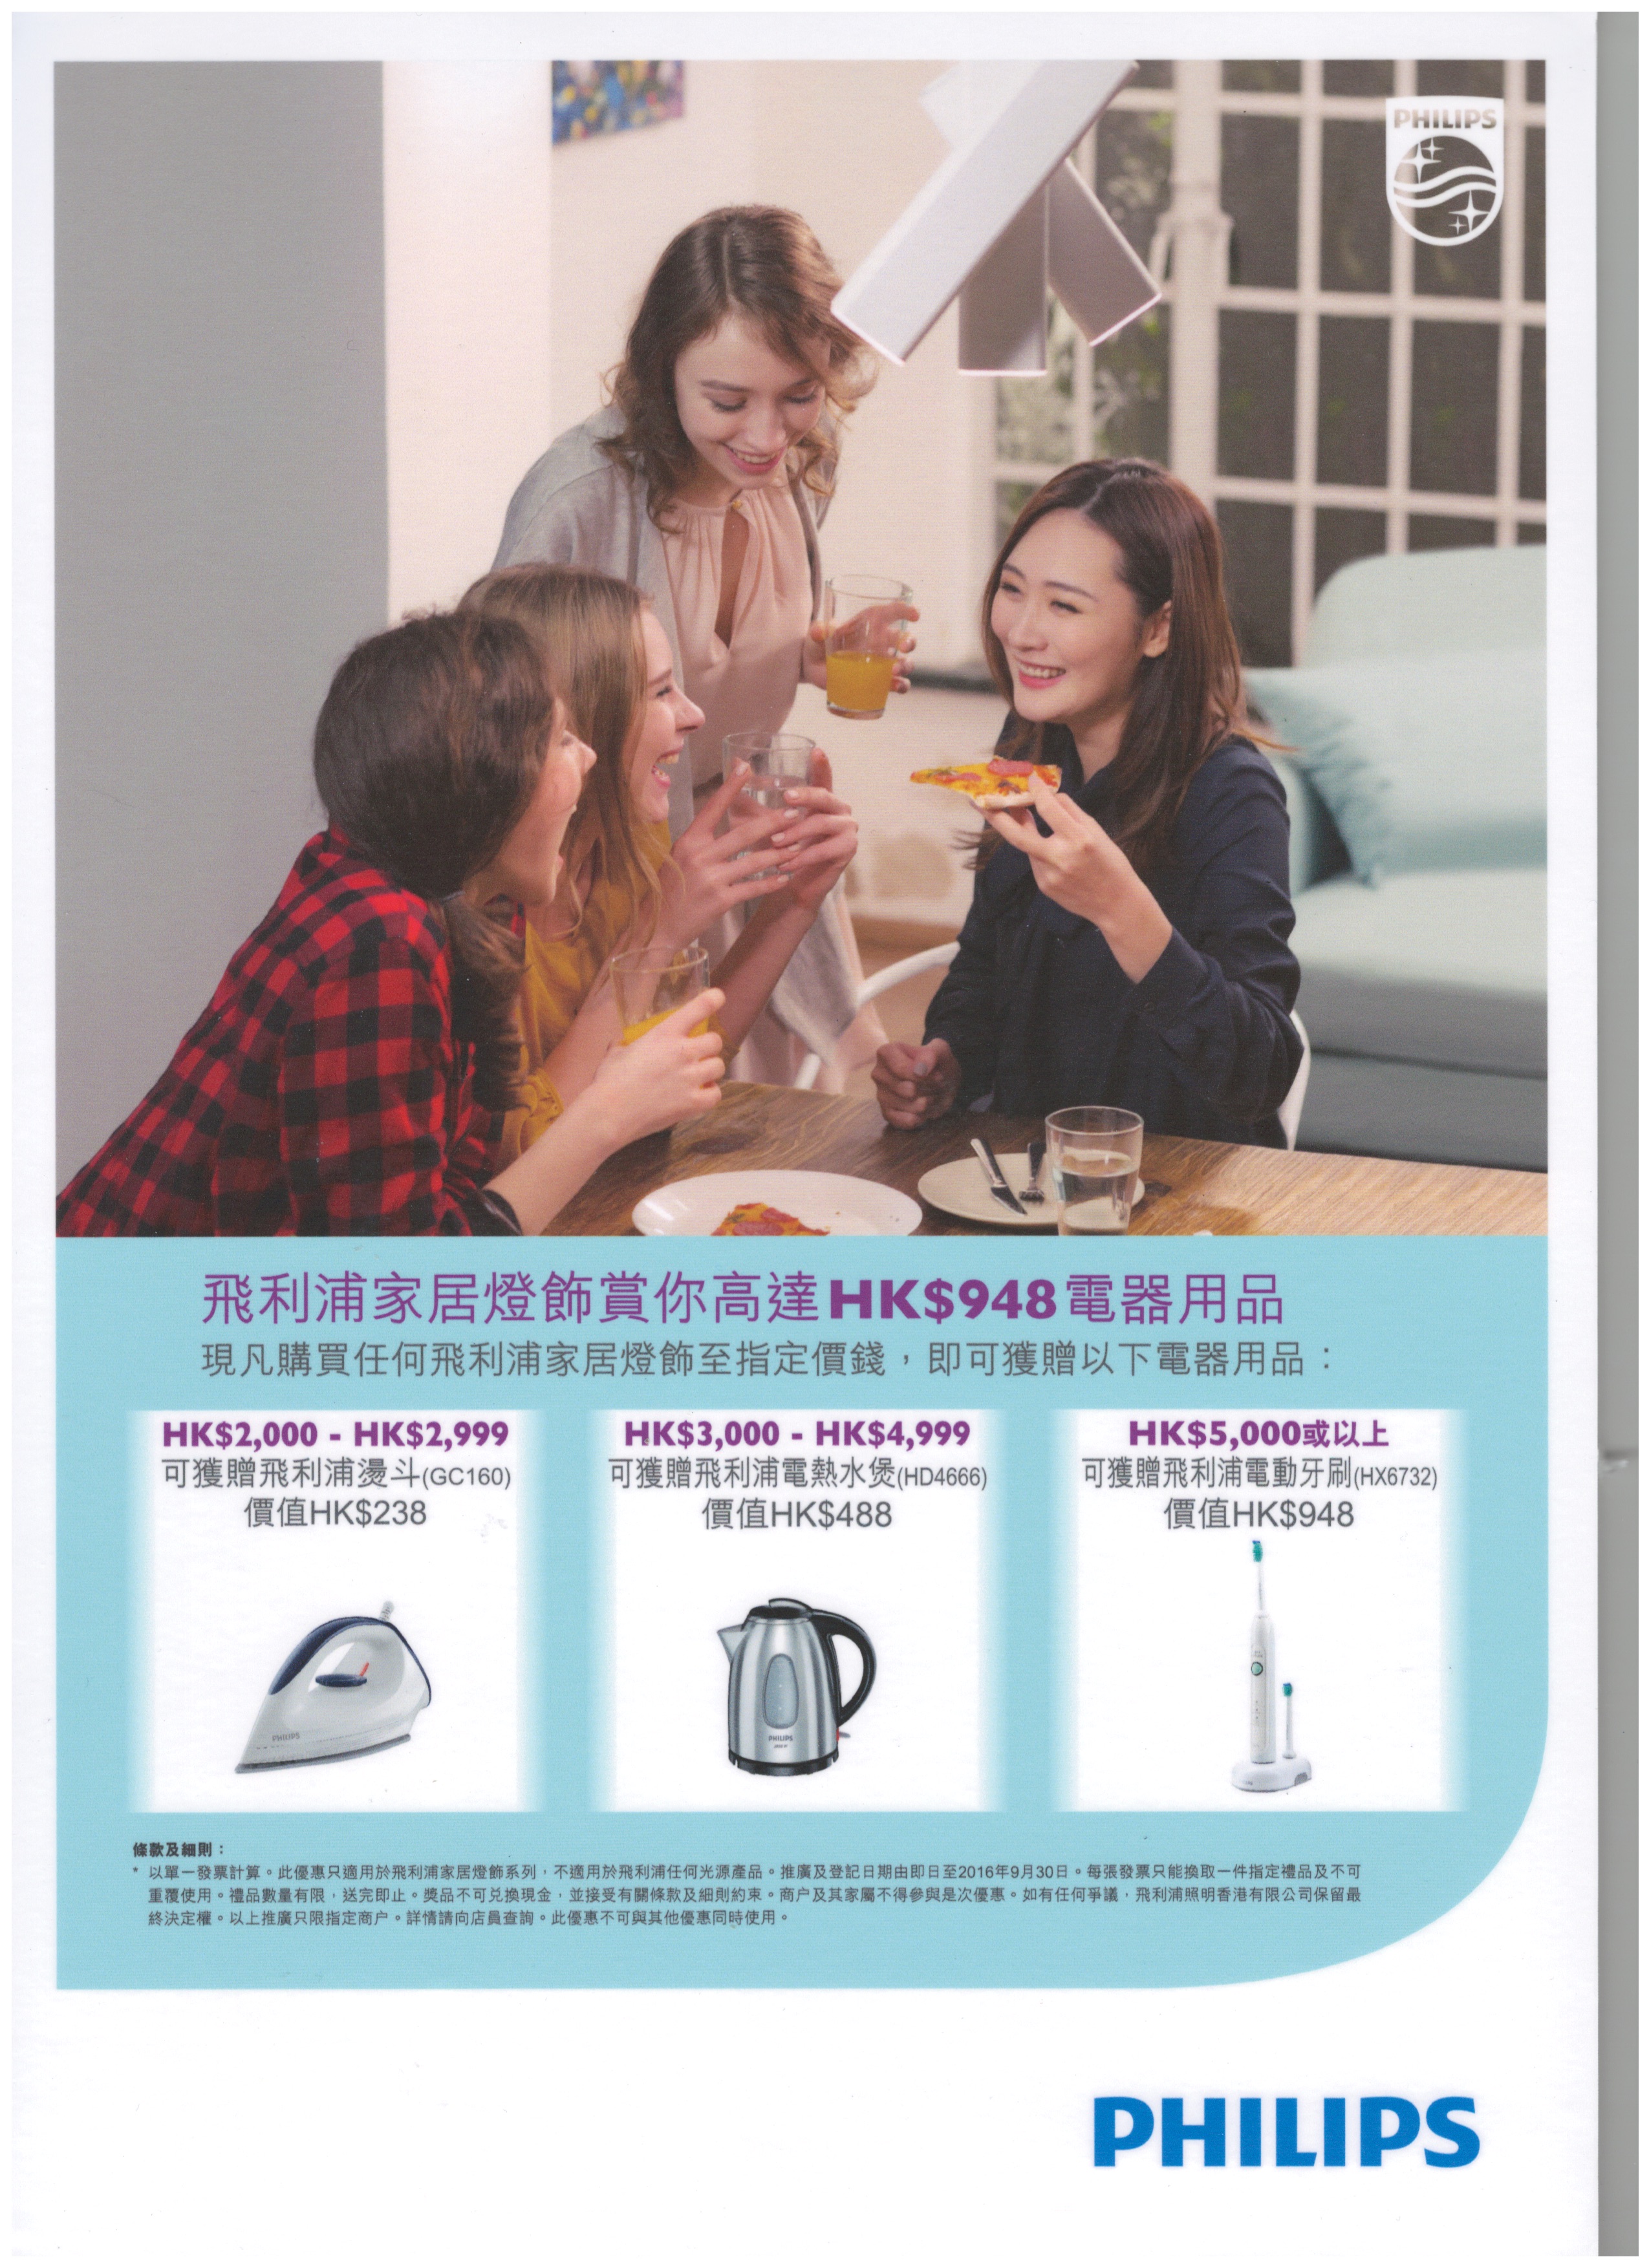 Philips Home Lighting Aug16 Promotion